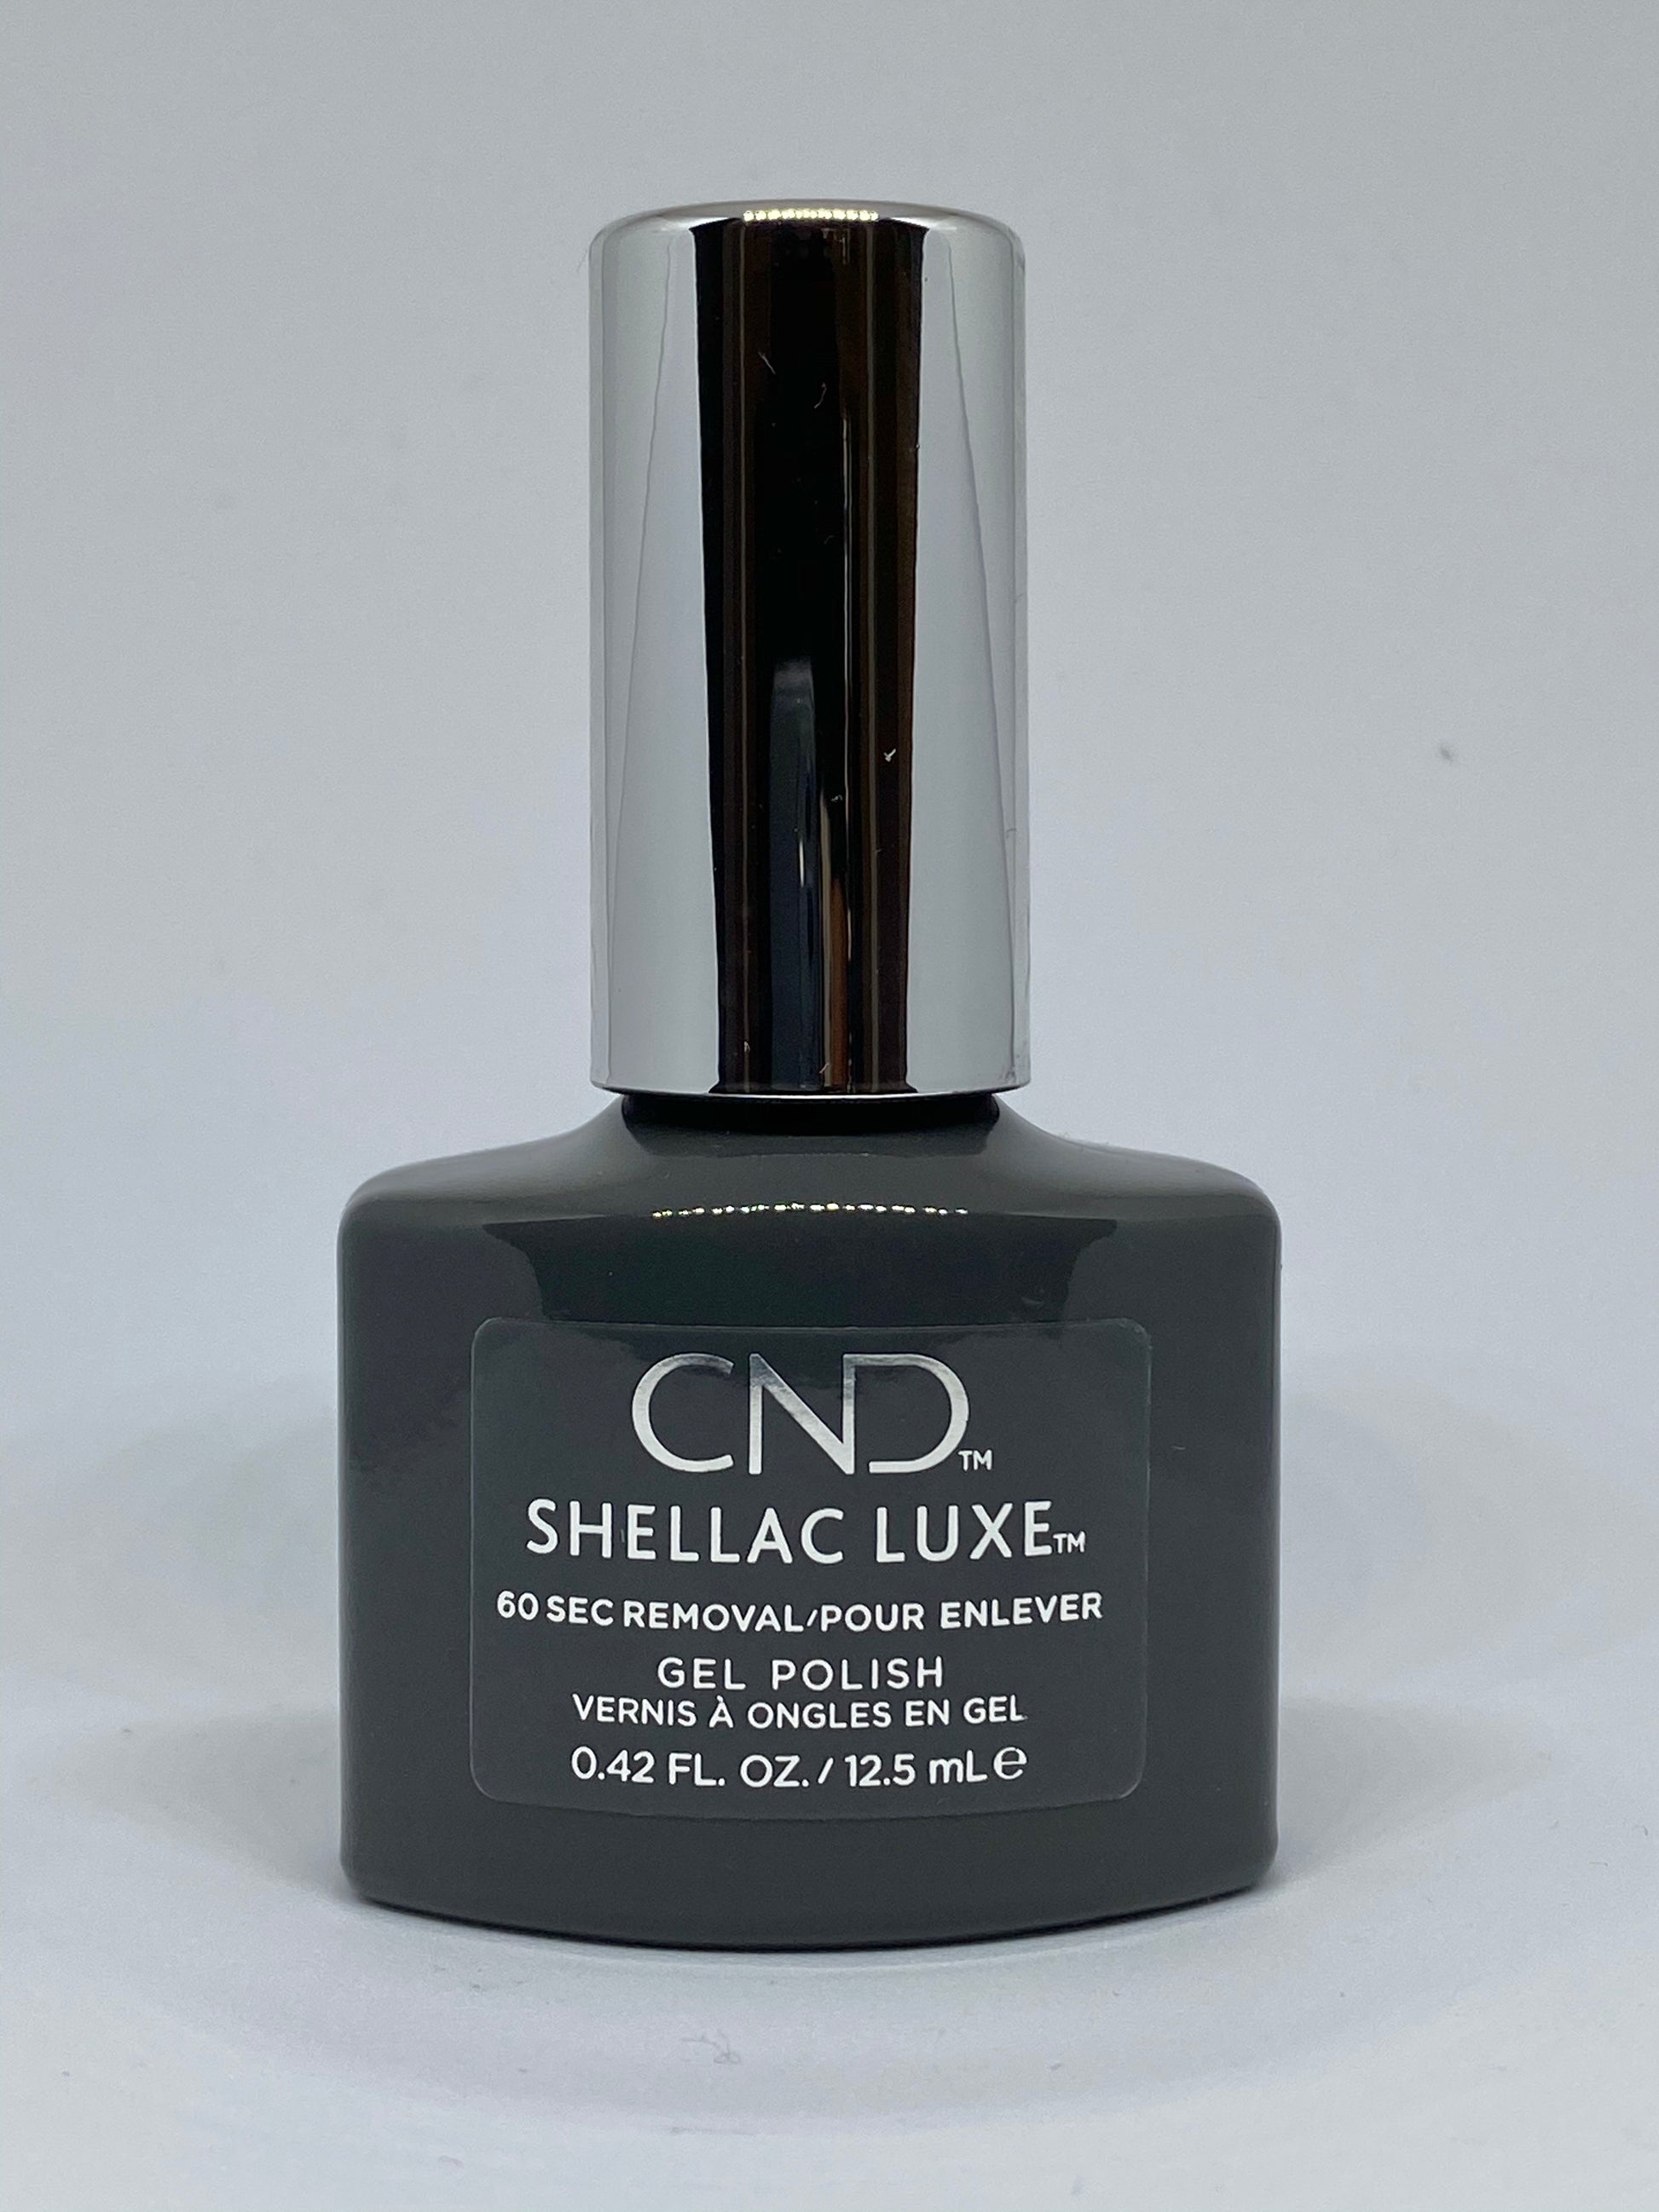 CND Shellac Luxe Gel Polish Silhouette #296-BeautyNmakeup.co.uk